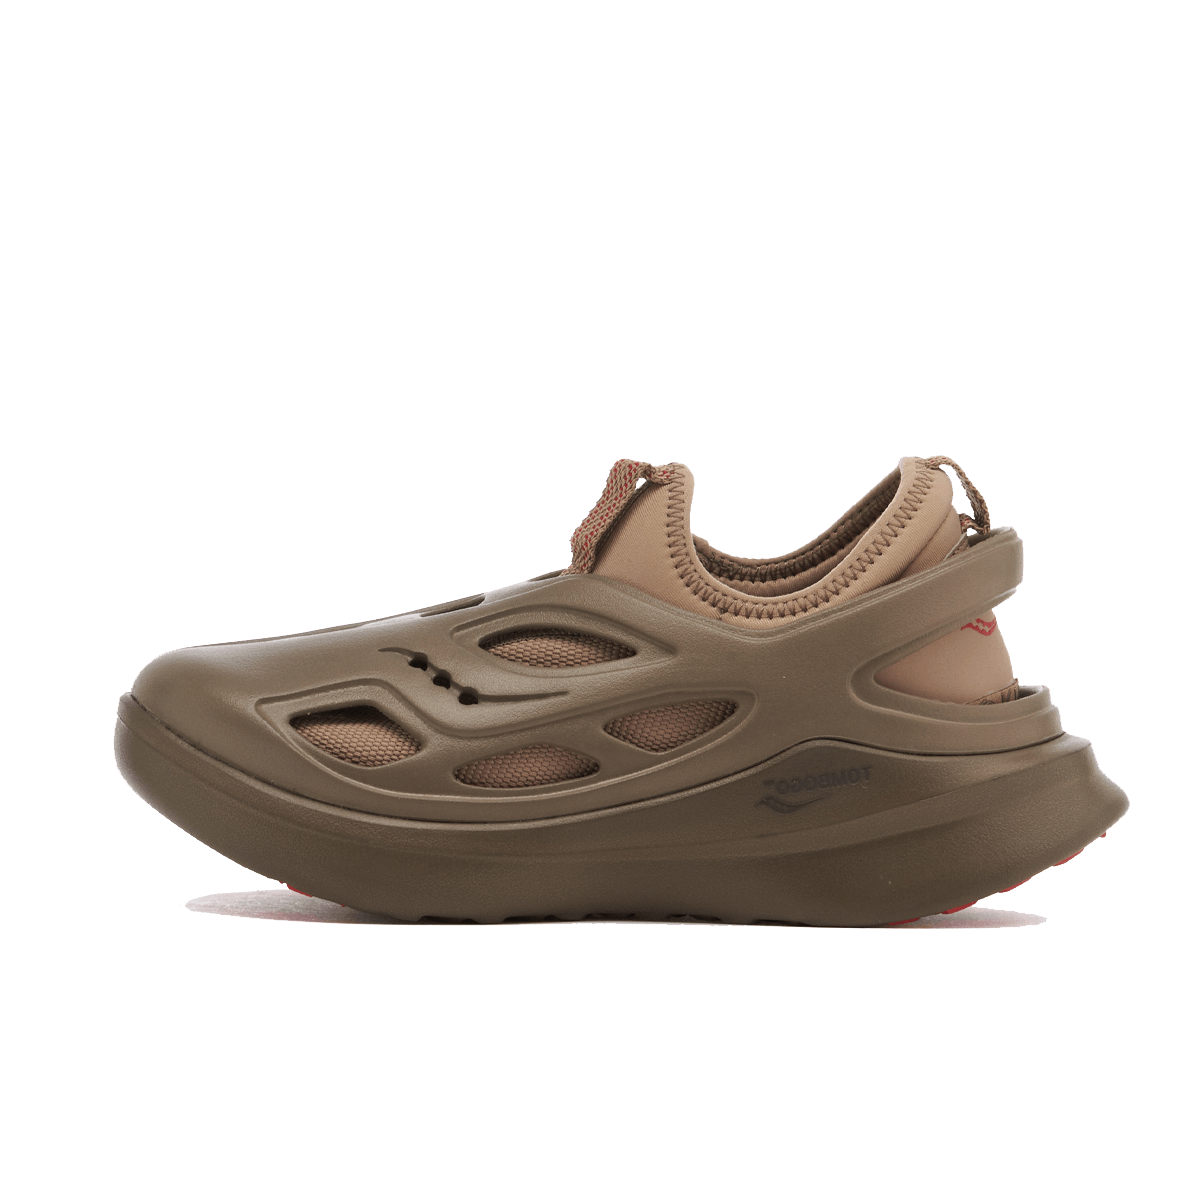 TOMBOGO x Saucony Butterfly 'Boulder Brown' S70828-2